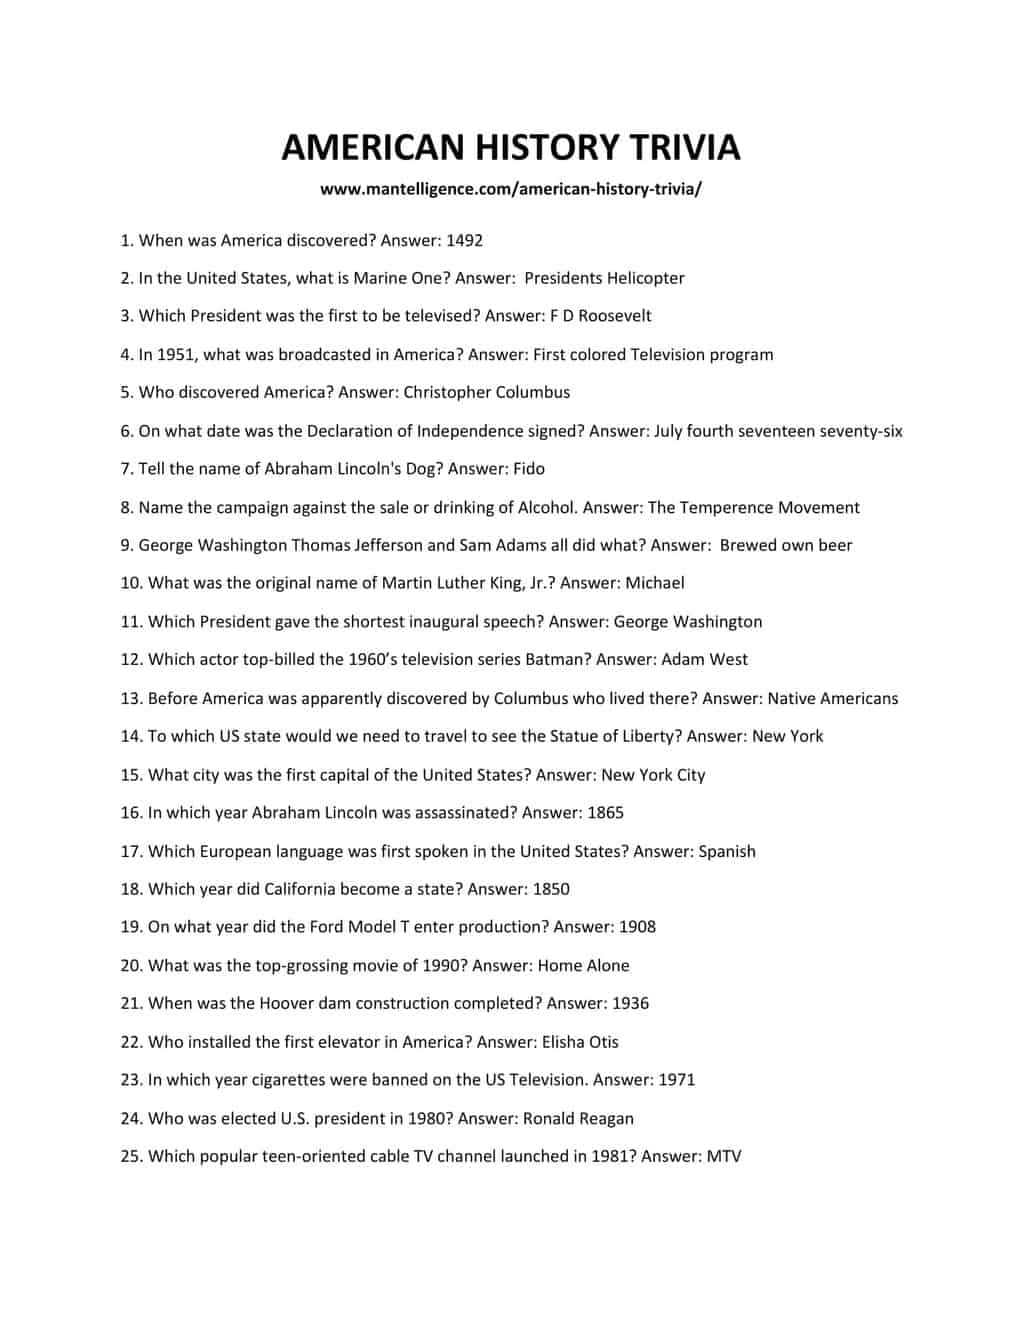 american-history-trivia-questions-and-answers-printable-challenge